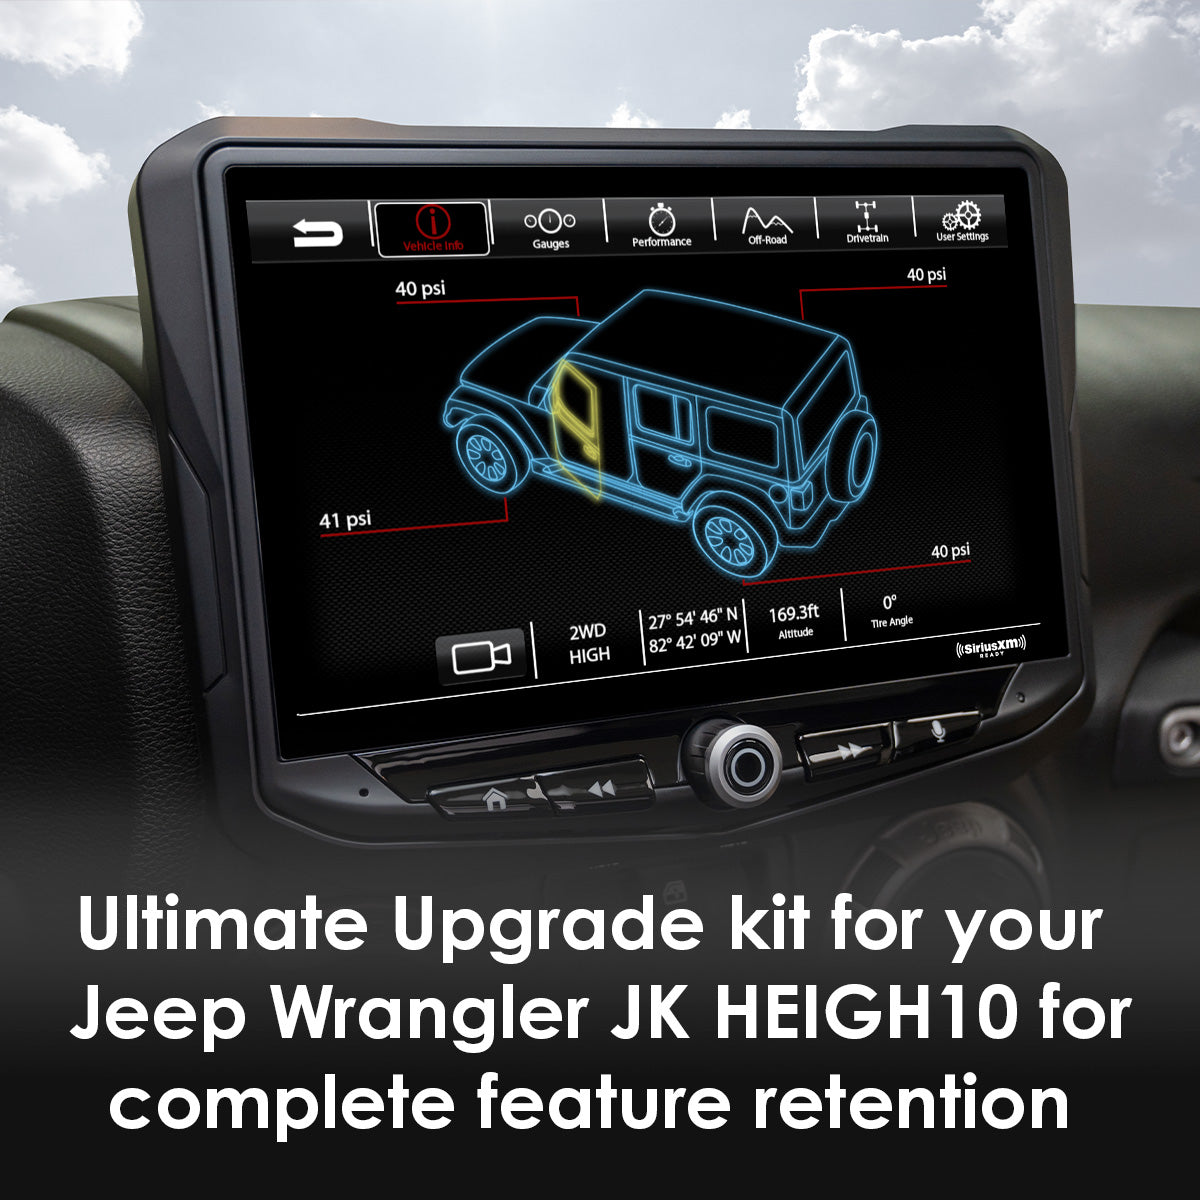 Jeep Wrangler JK (2011-2018) HEIGH10 10" Radio Fully Integrated Kit with Backup Camera & Spare Tire Mount